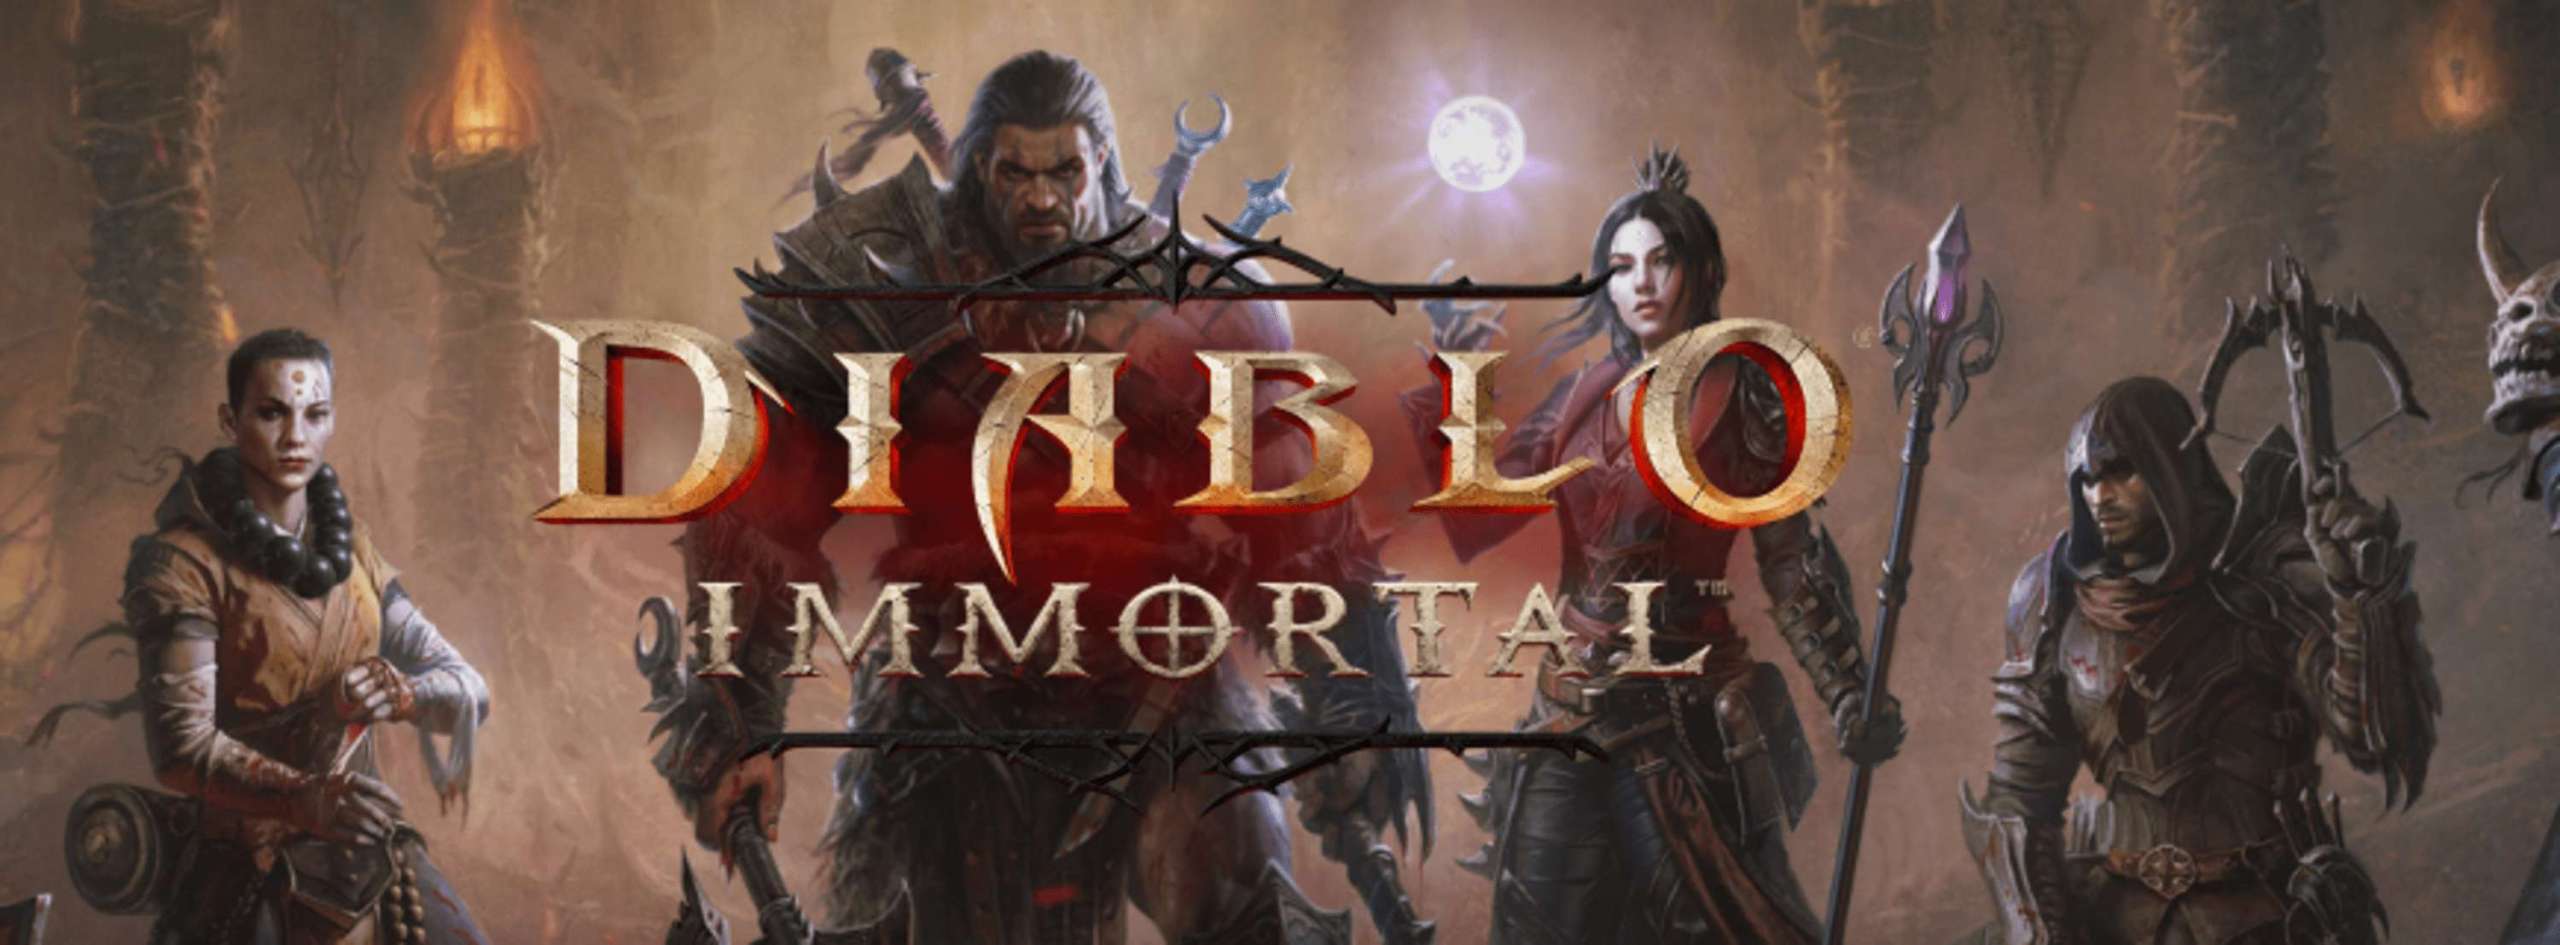 Release Date And Content Of Diablo Immortal’s First Big Patch